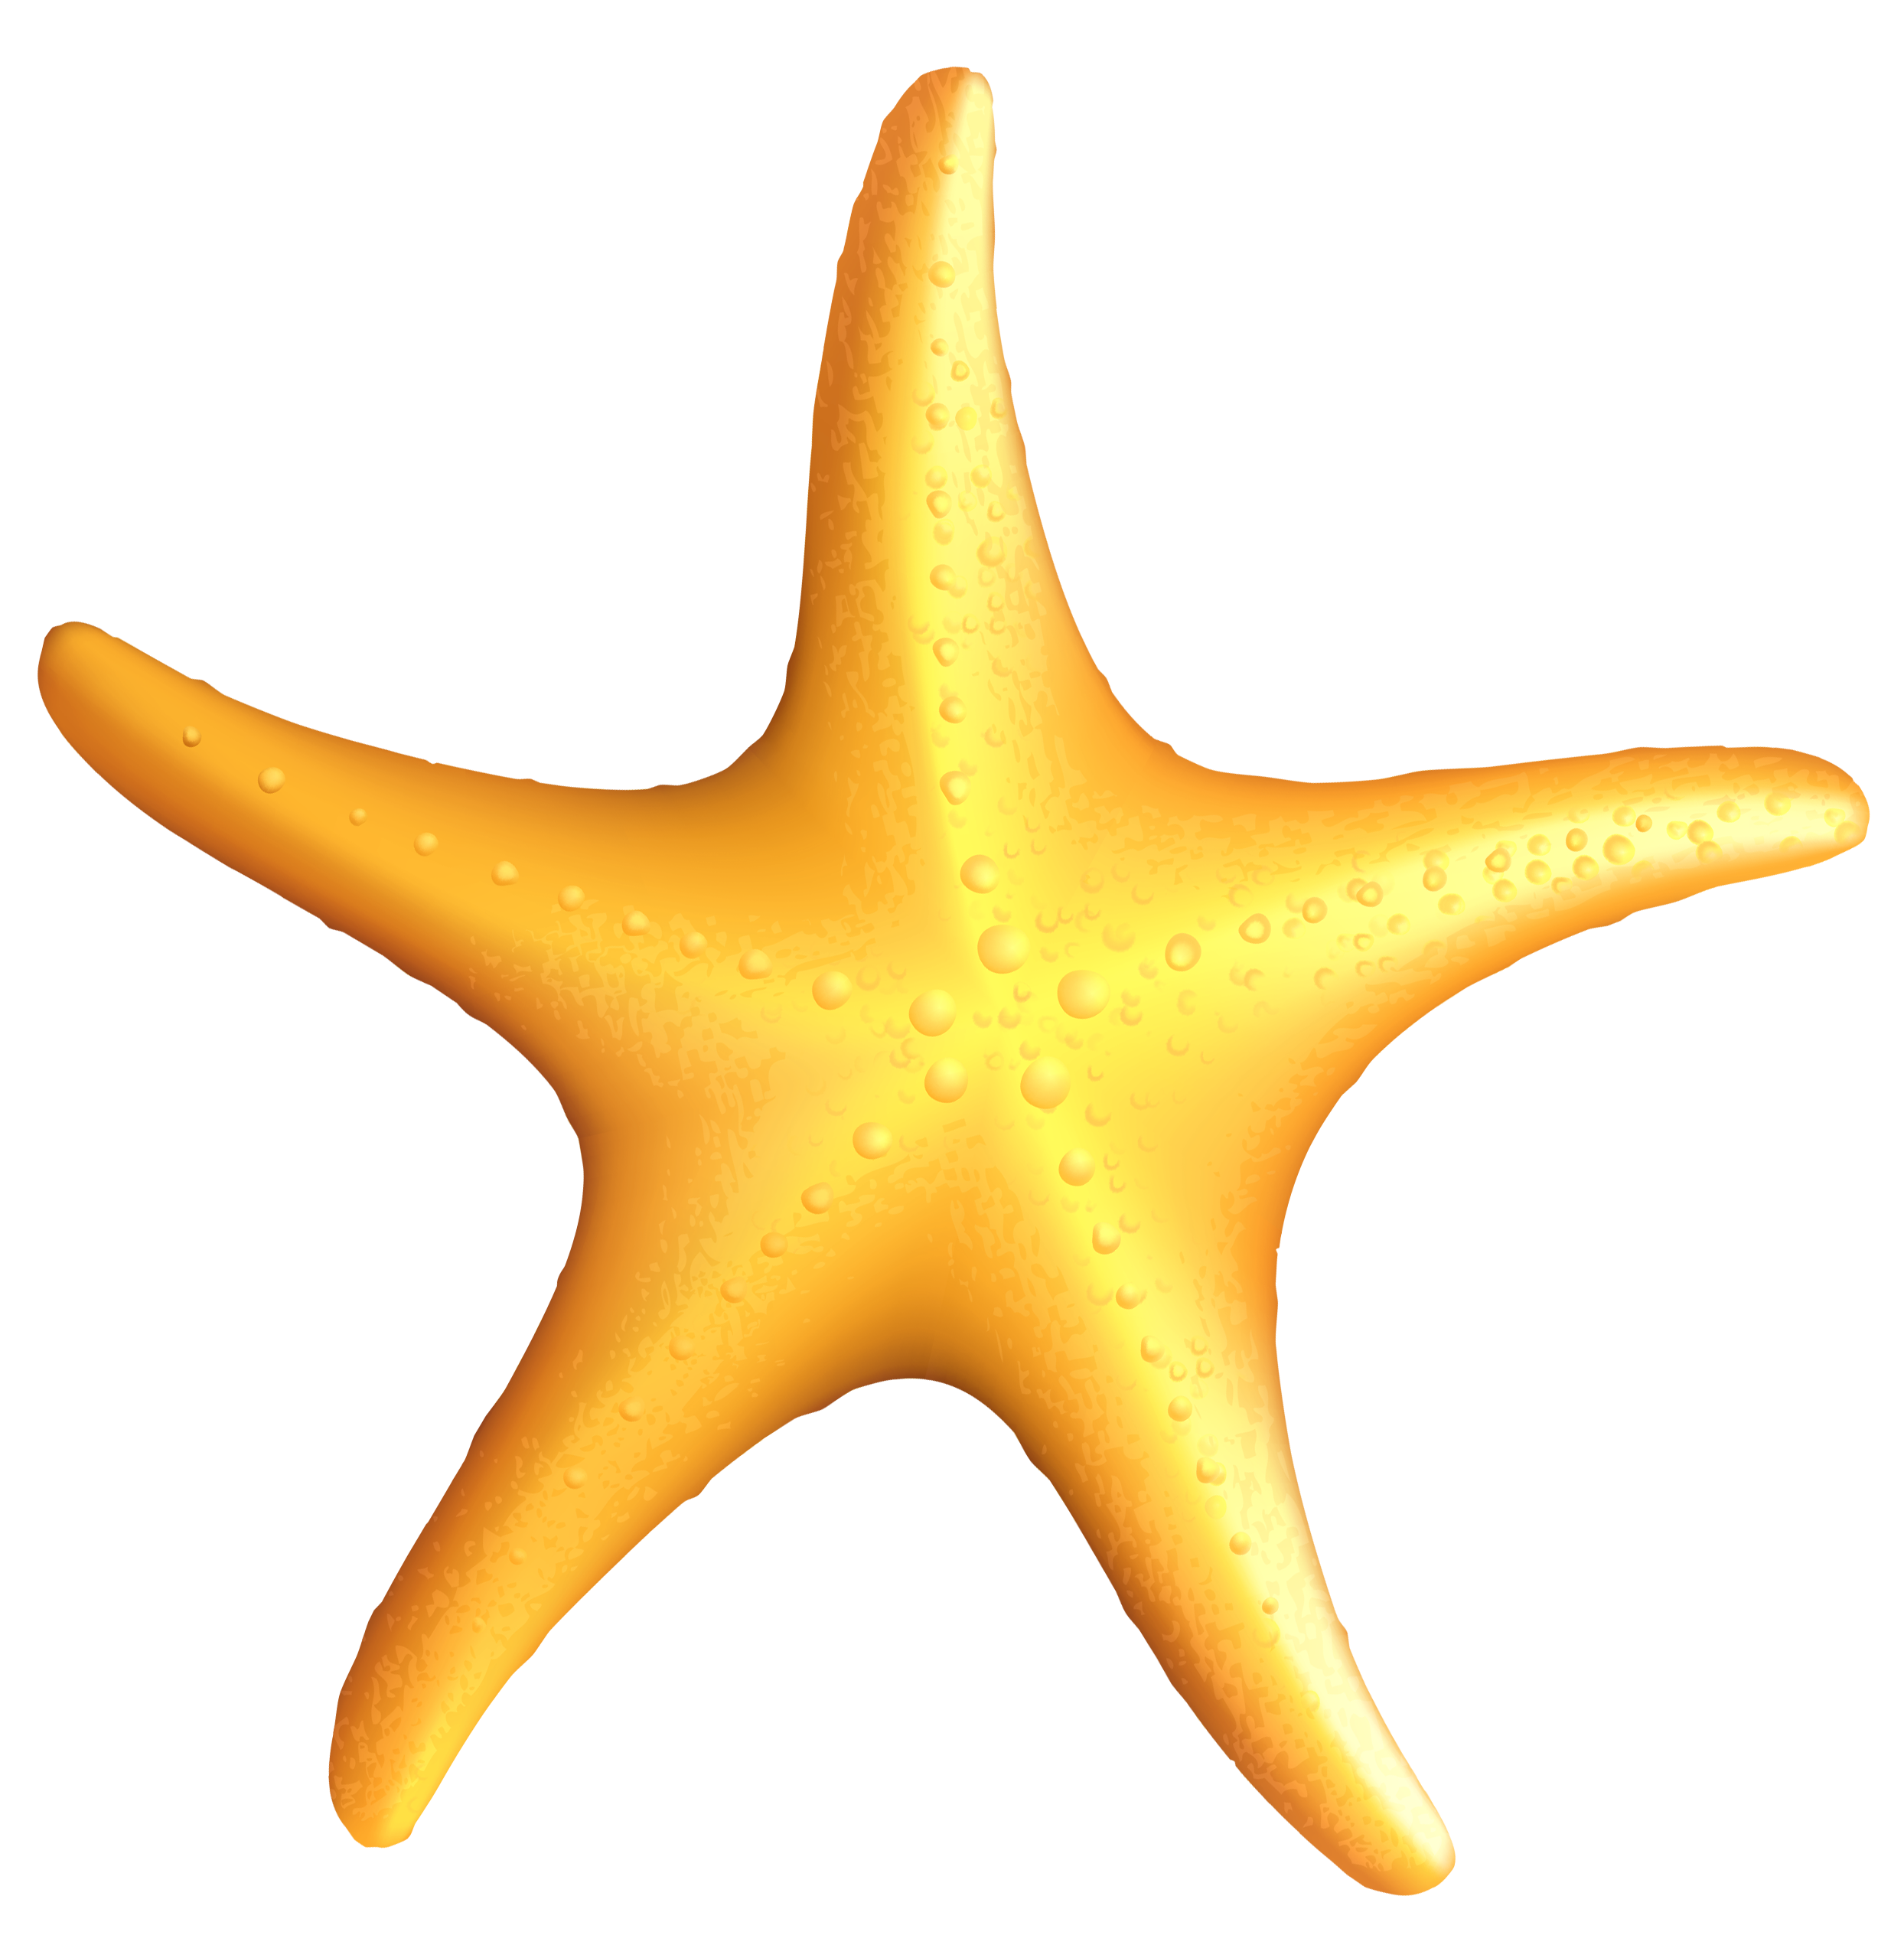 Free Starfish Clipart Transparent Background, Download Free